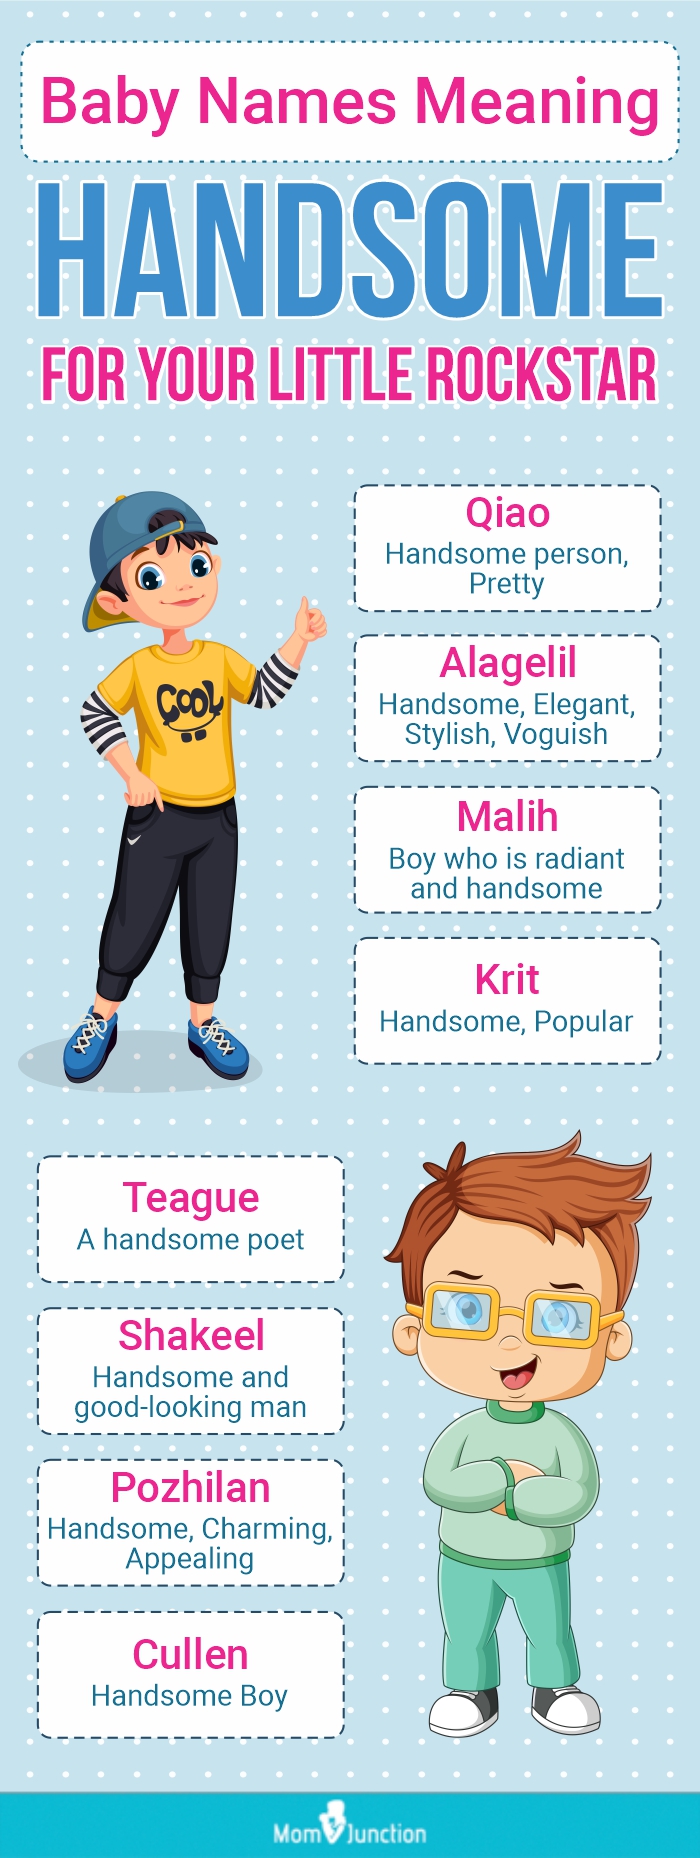 baby names meaning handsome for your little rockstar (infographic)